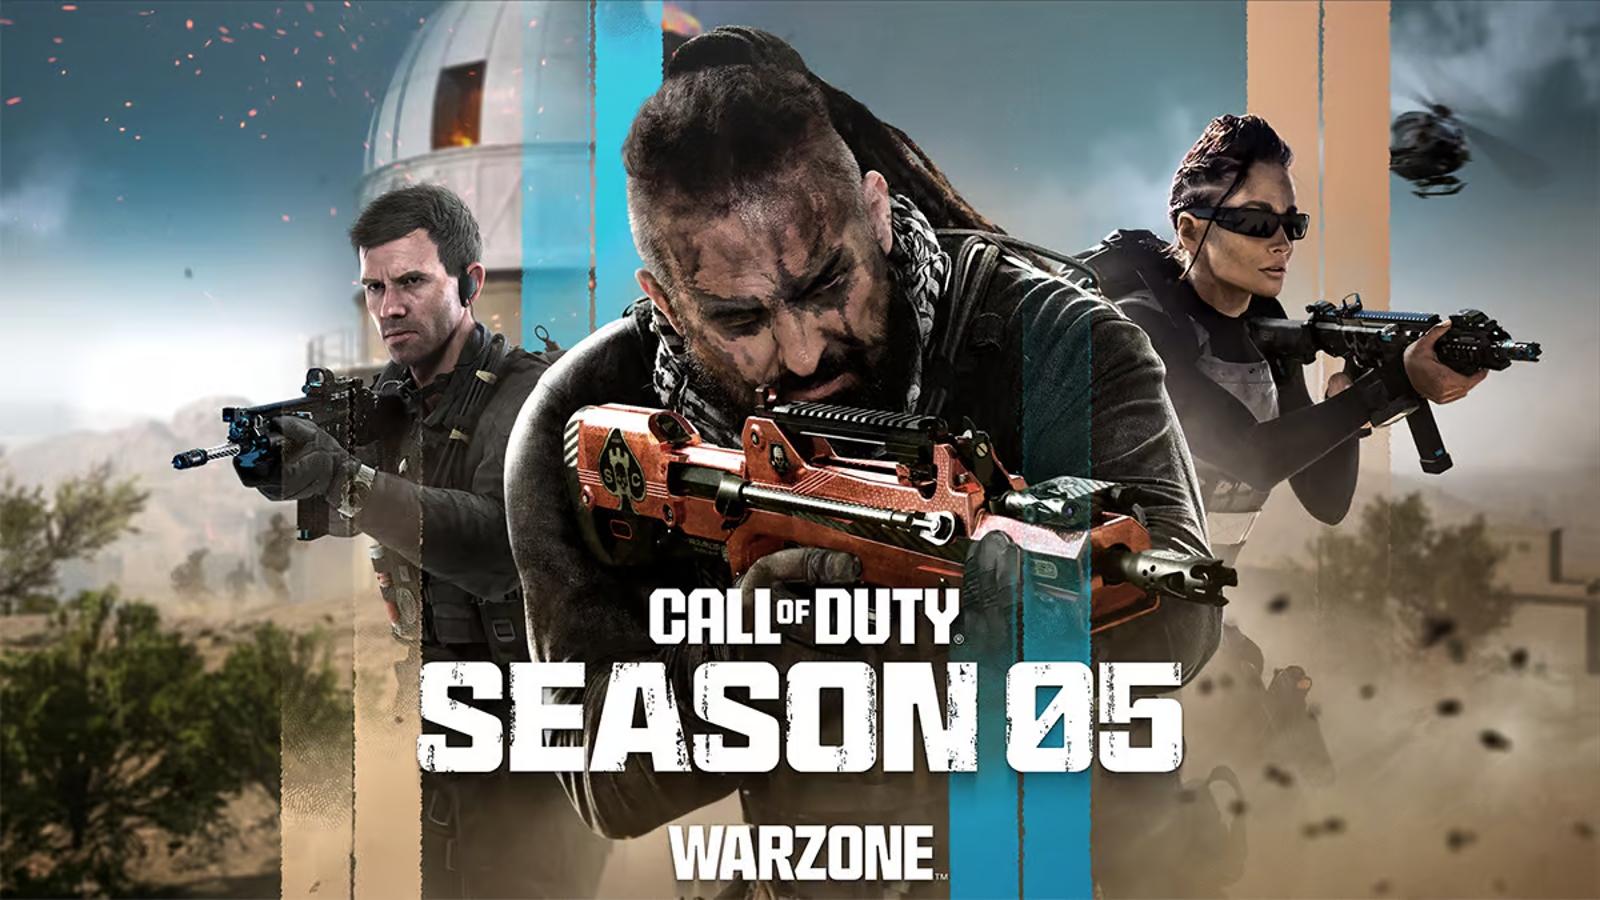 COD Warzone Mobile Season 2 patch notes